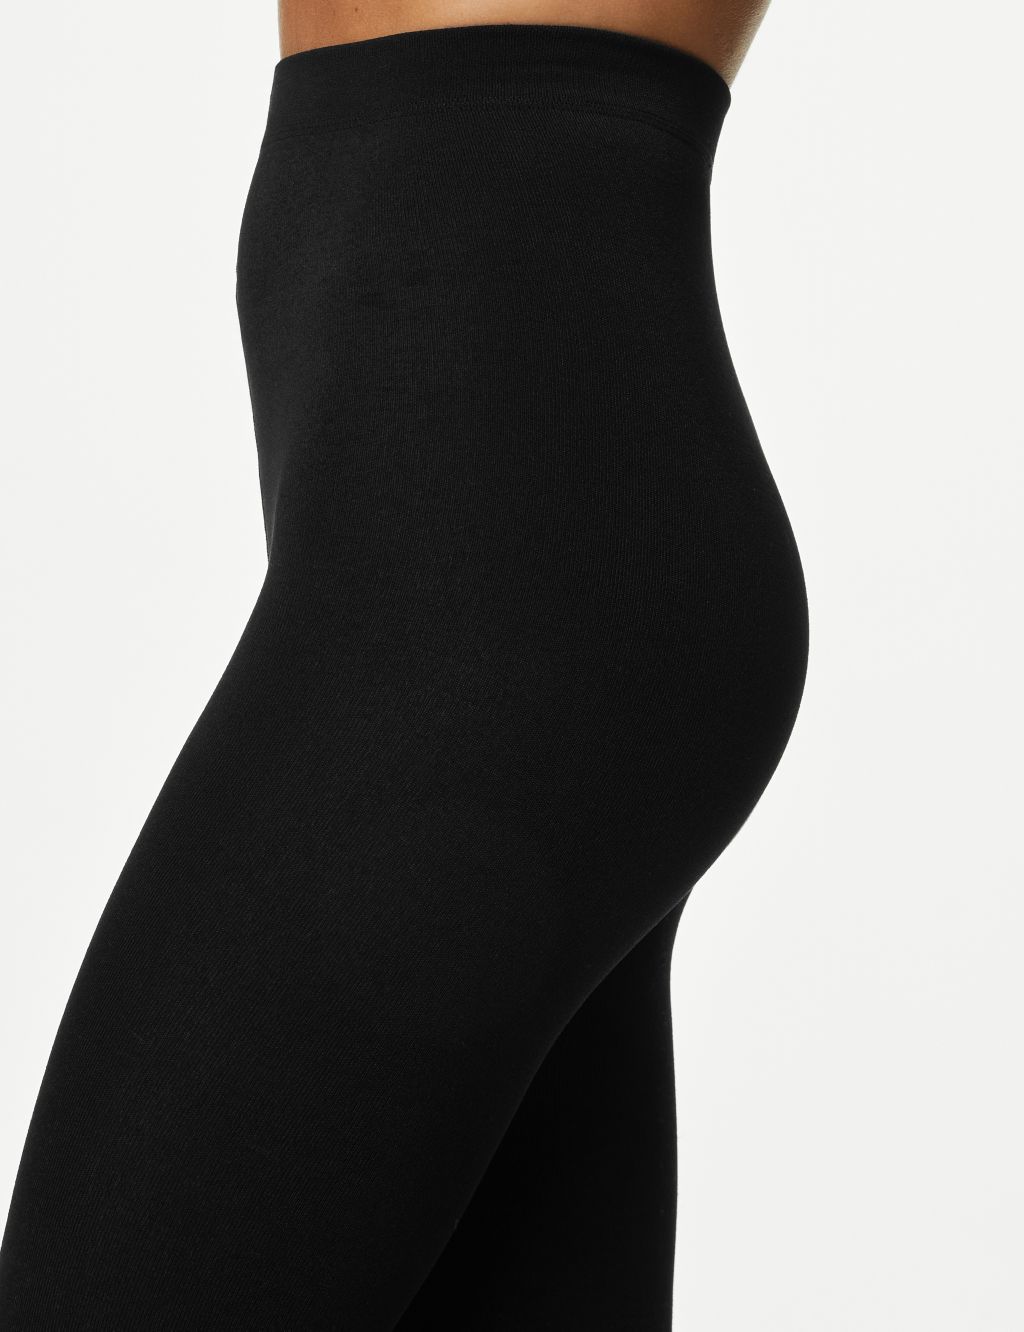 200 Denier Thermal Fleece Lined Tights image 3